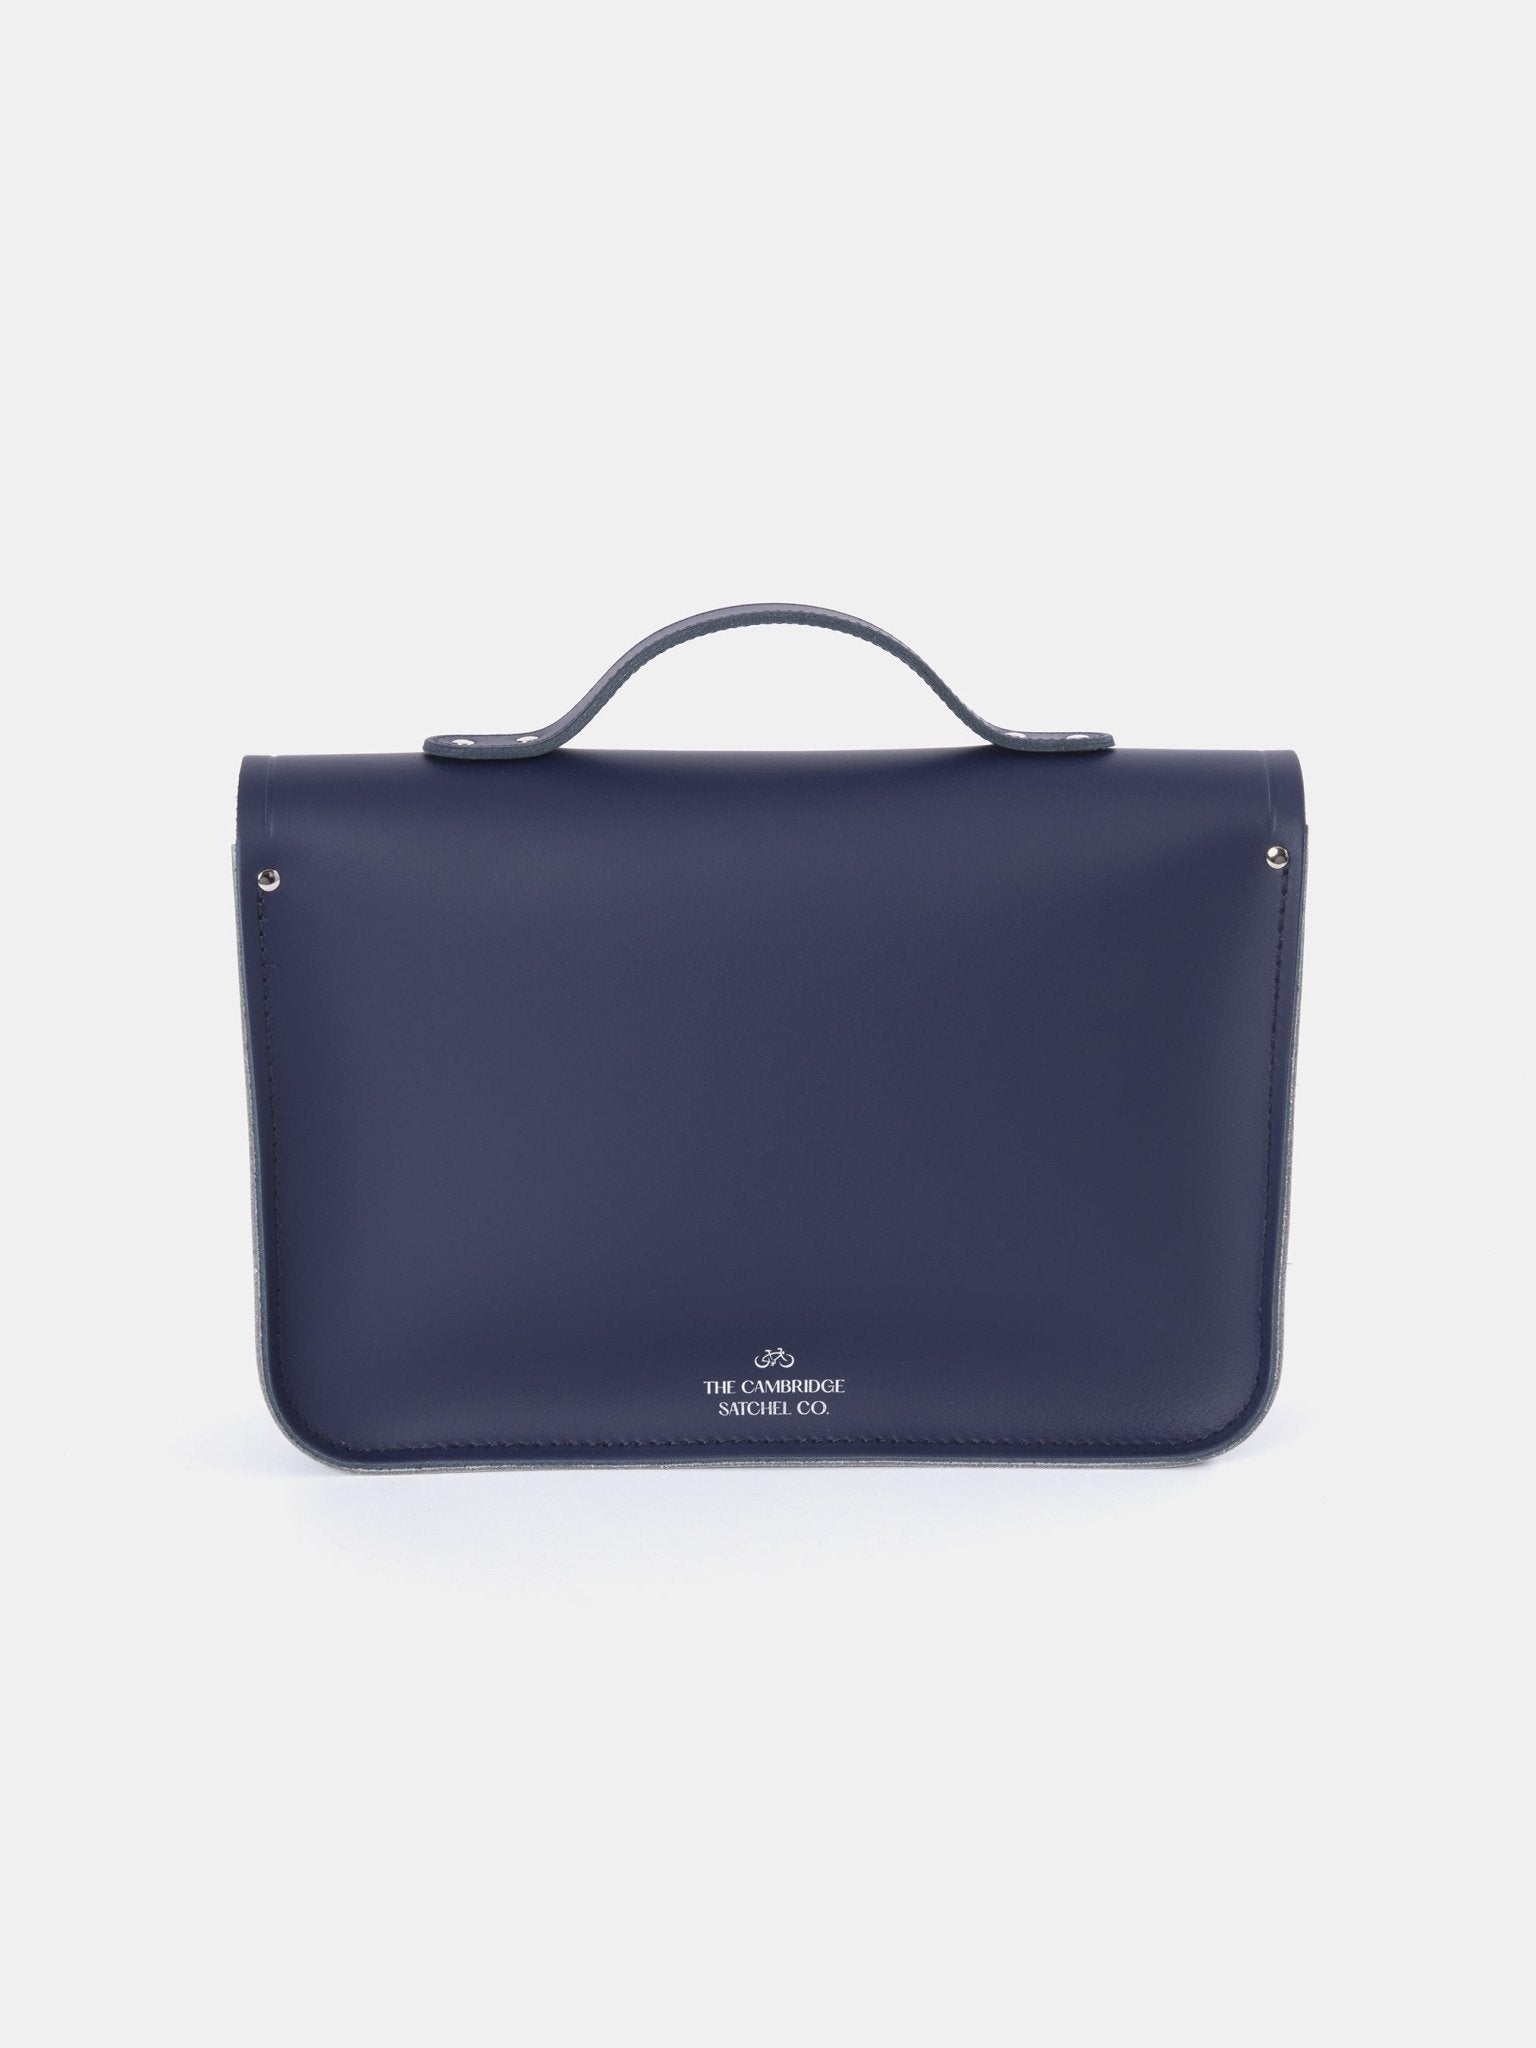 The 13 Inch Batchel - Midnight Picnic Matte, French Grey & Clay - The Cambridge Satchel Company UK Store